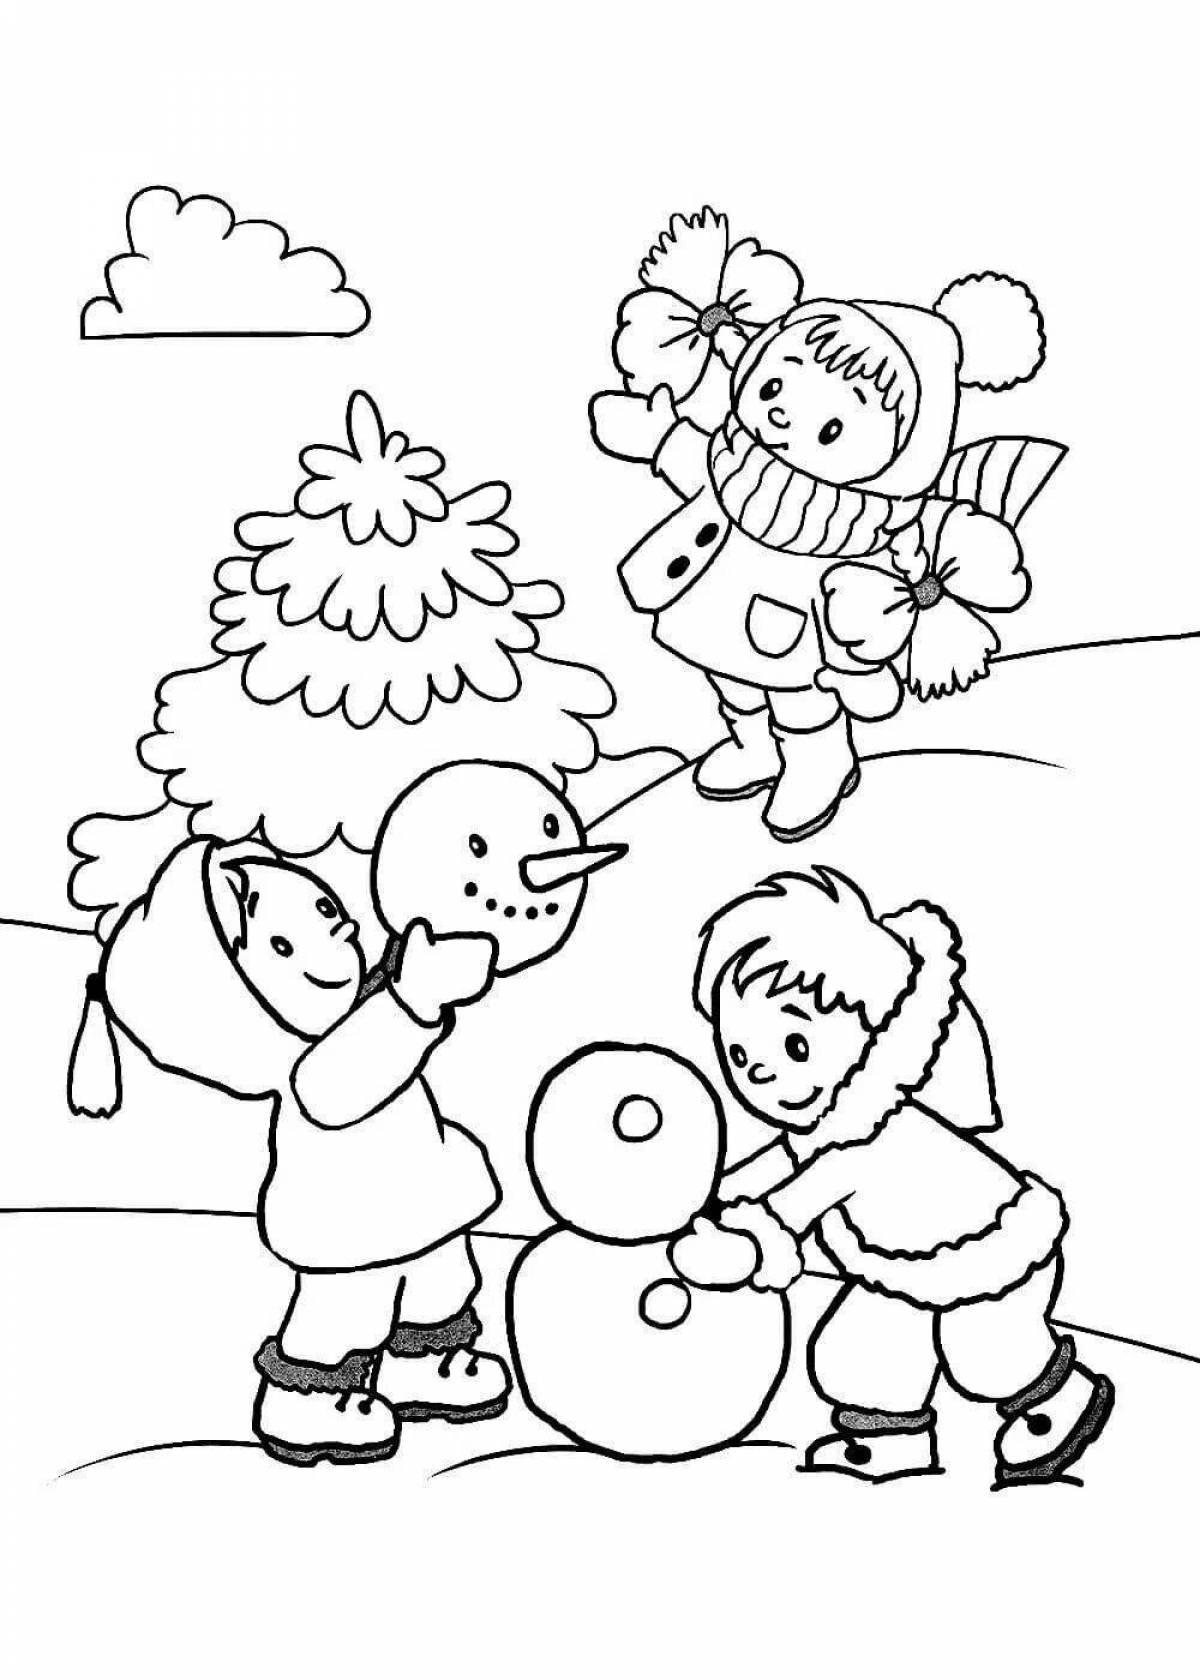 Coloring page slippery winter